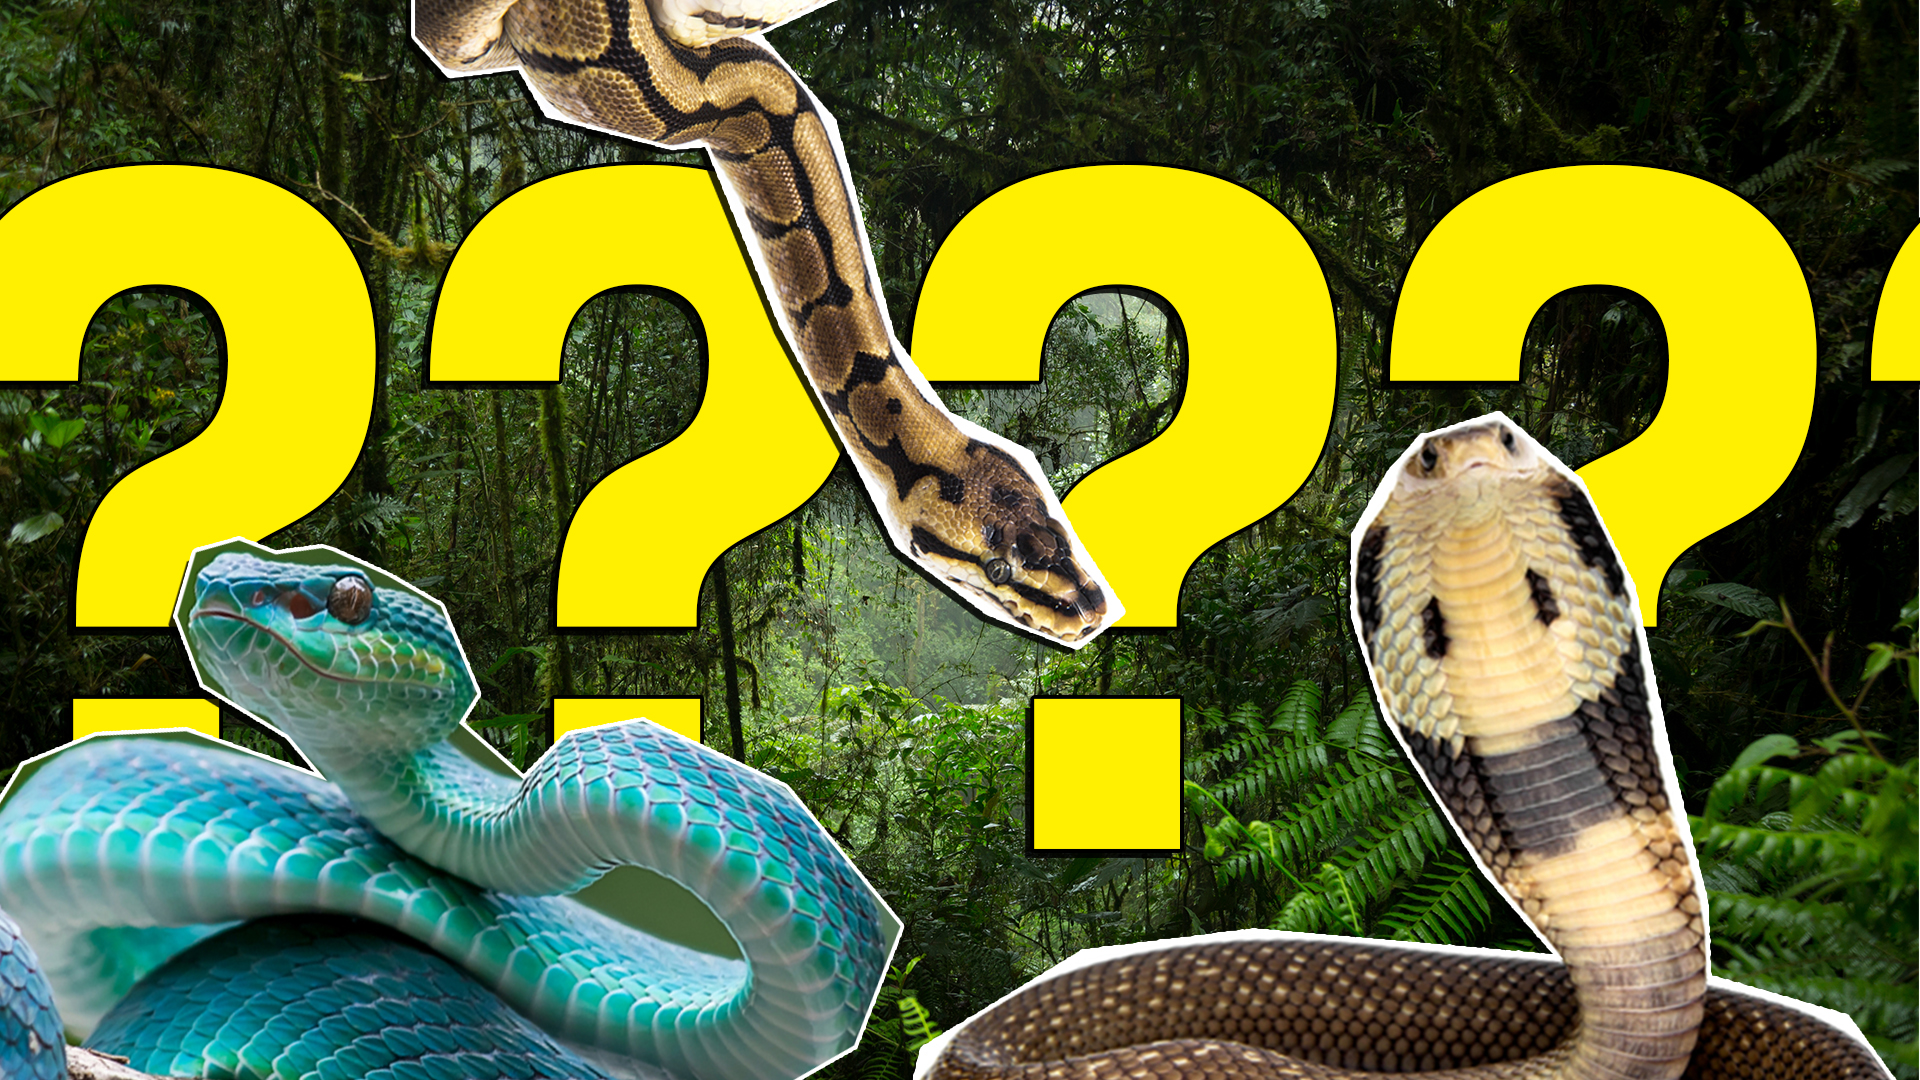 10 Incredible King Cobra Facts (No Other Snake Does #7!) - A-Z Animals